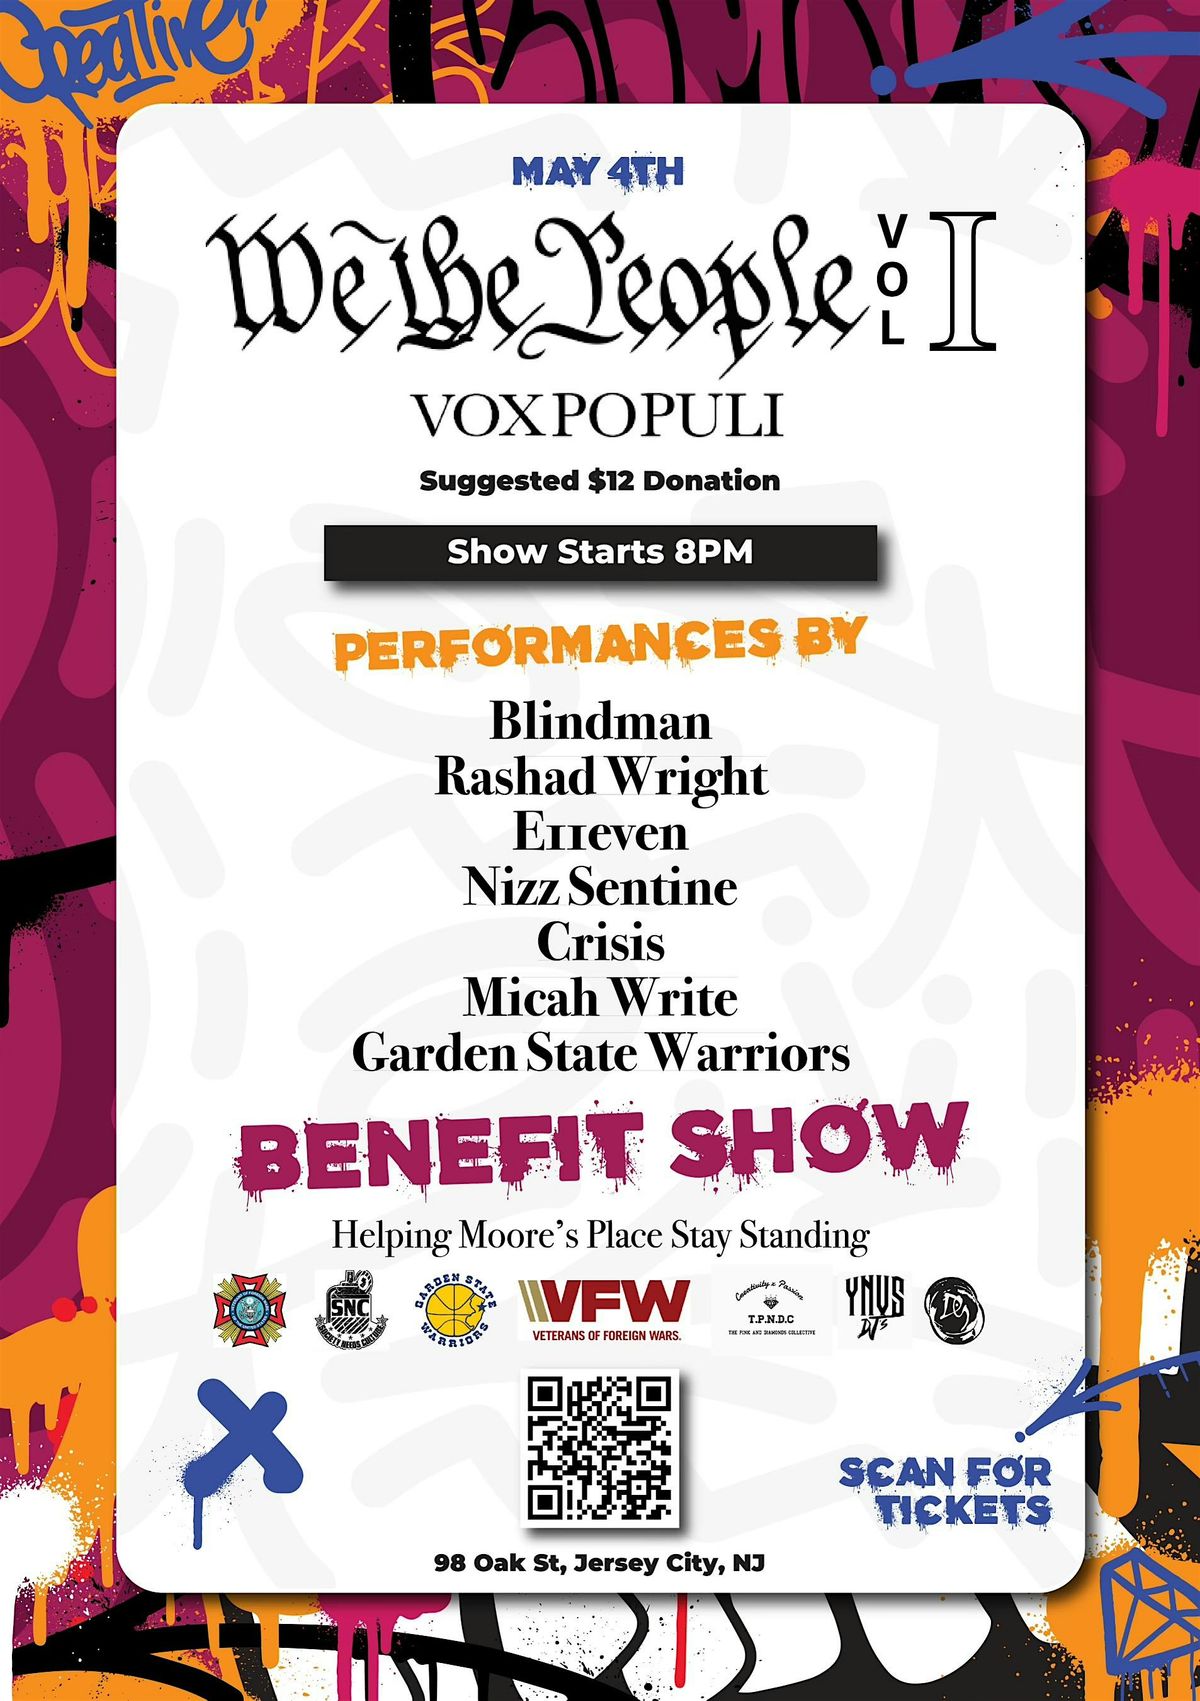 WE THE PEOPLE (Volume I) - A Benefit Show for Moore's Place